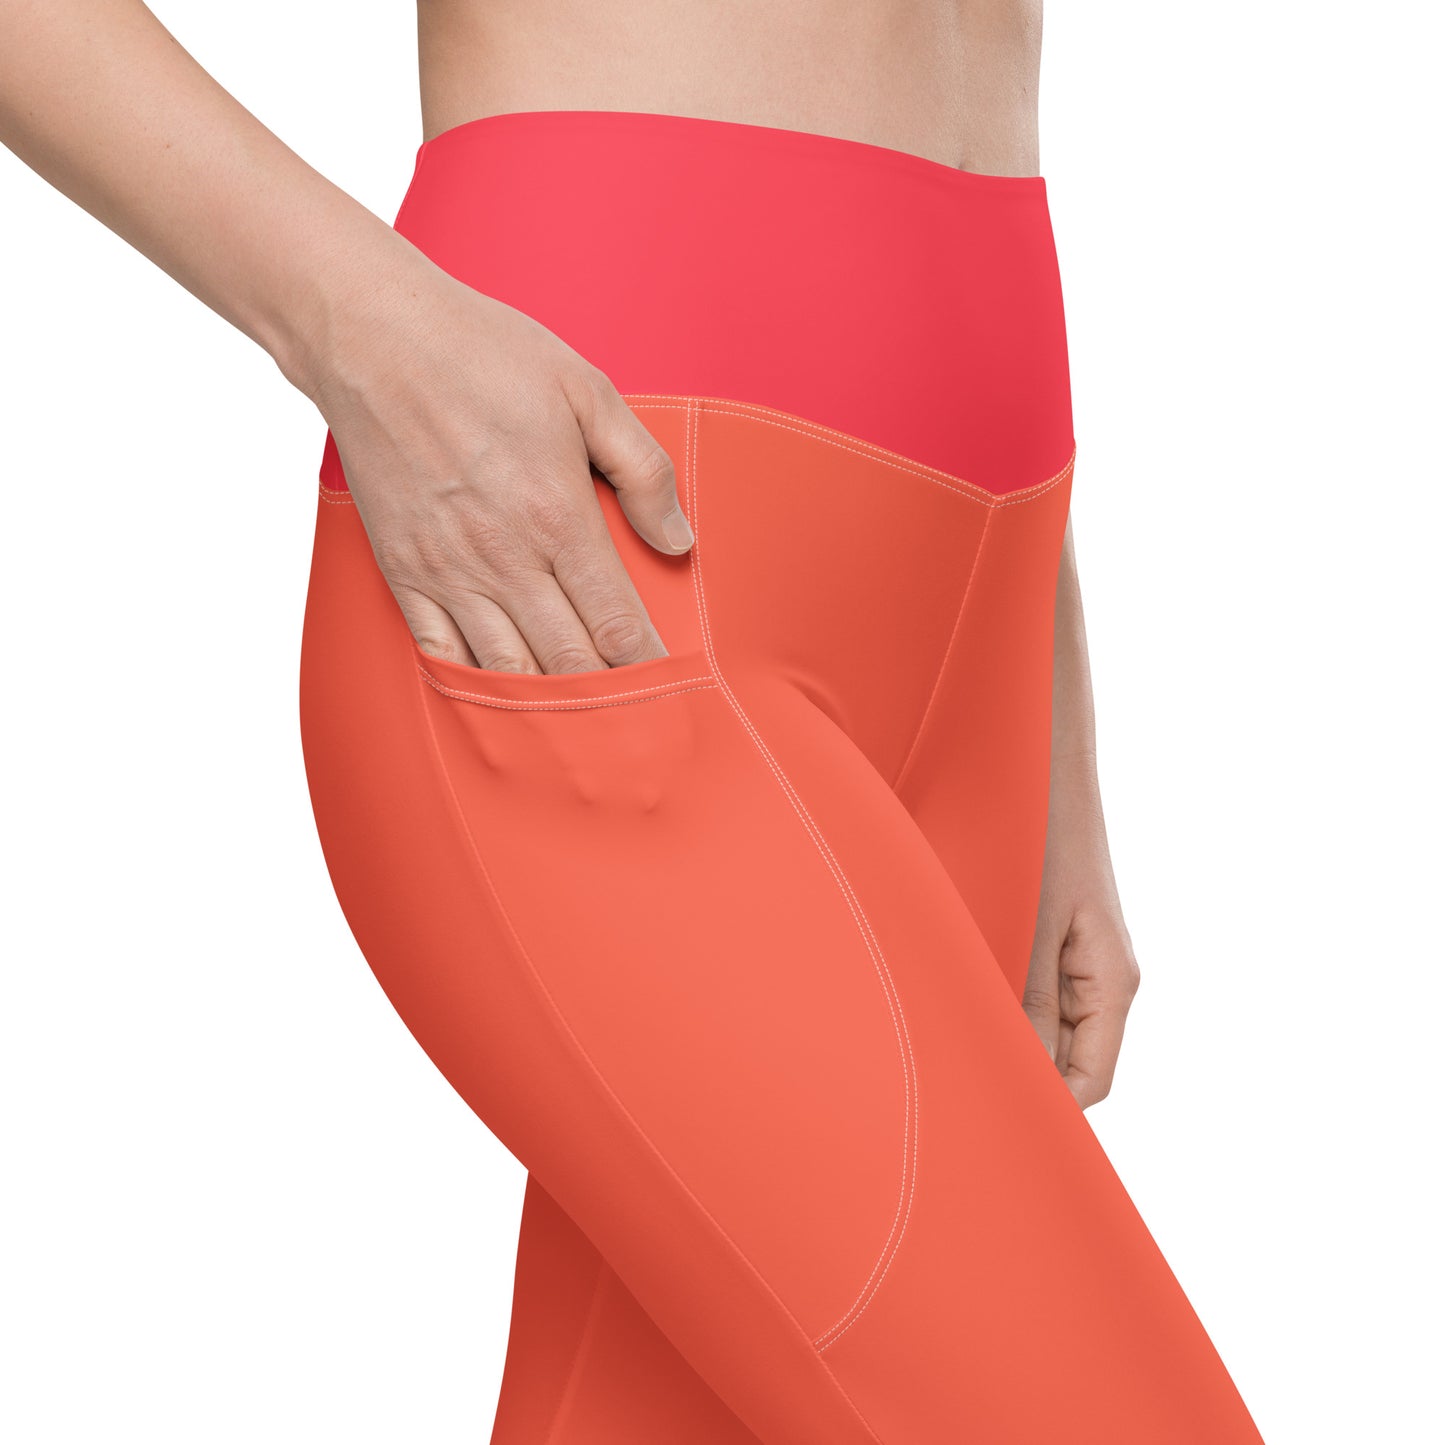 Cotswolds Colorblock High Waist 7/8 Recycled Yoga Leggings / Yoga Pants with Pockets